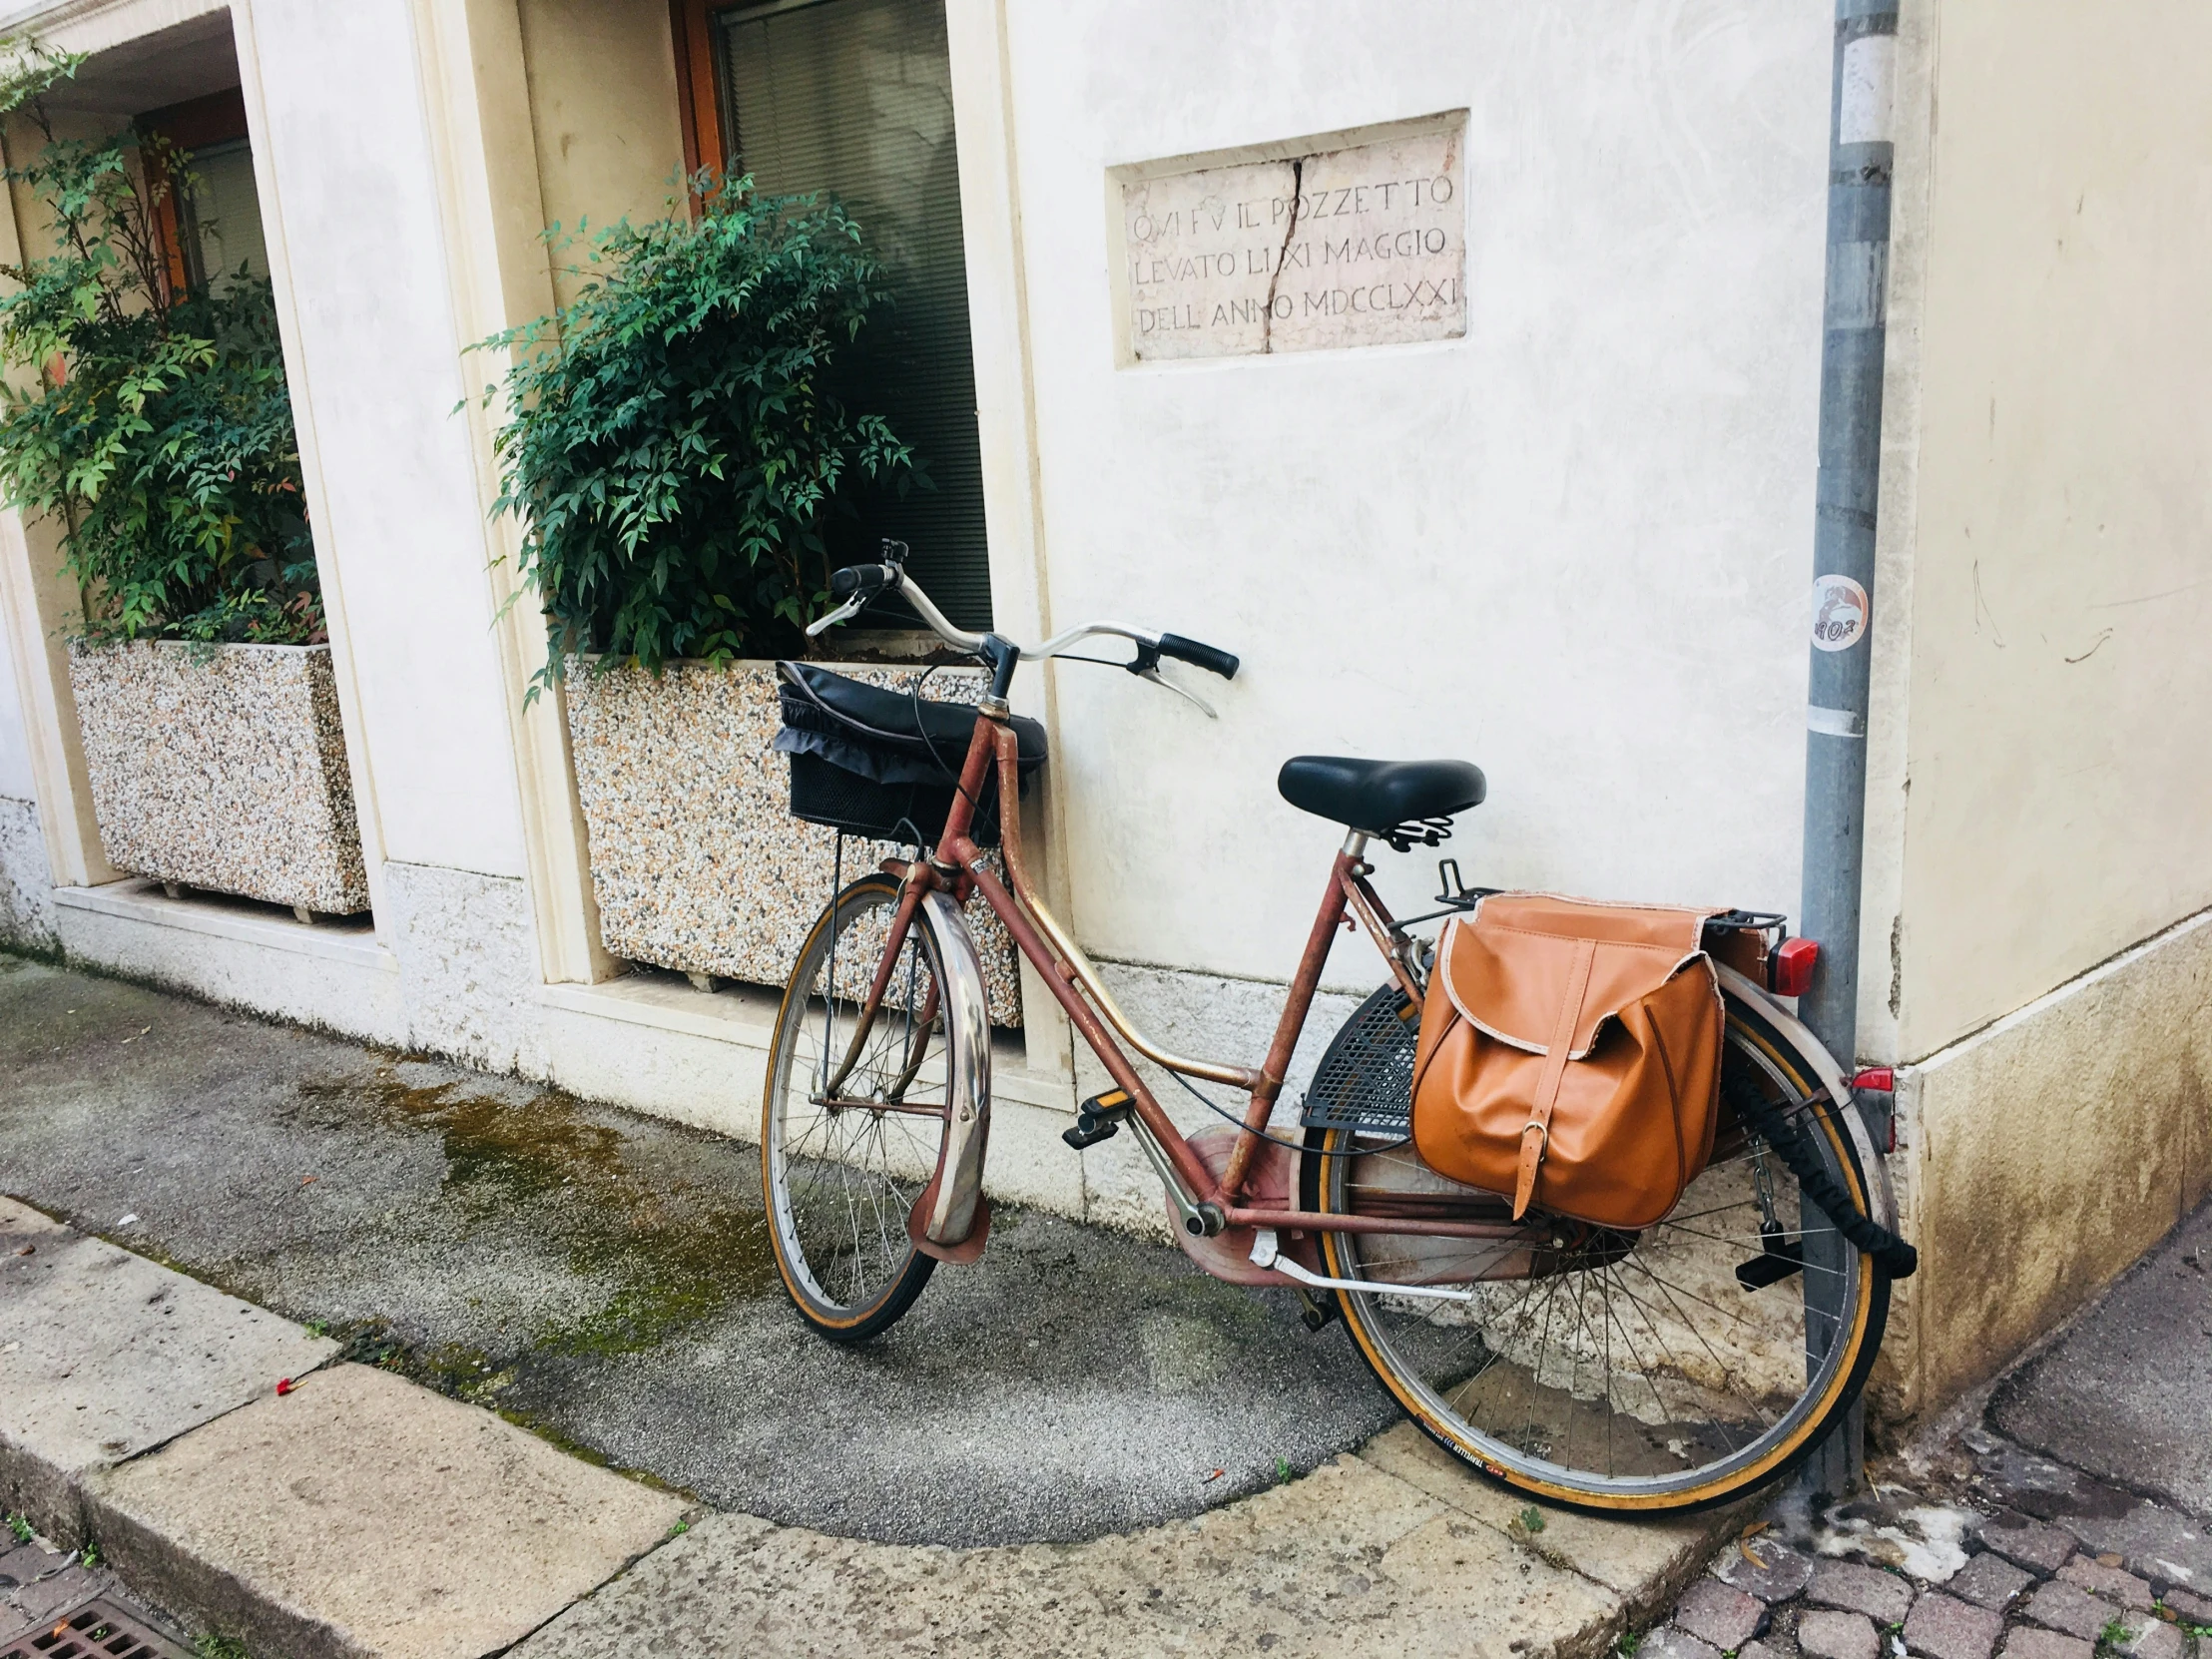 the bicycle is leaning against the wall next to a purse